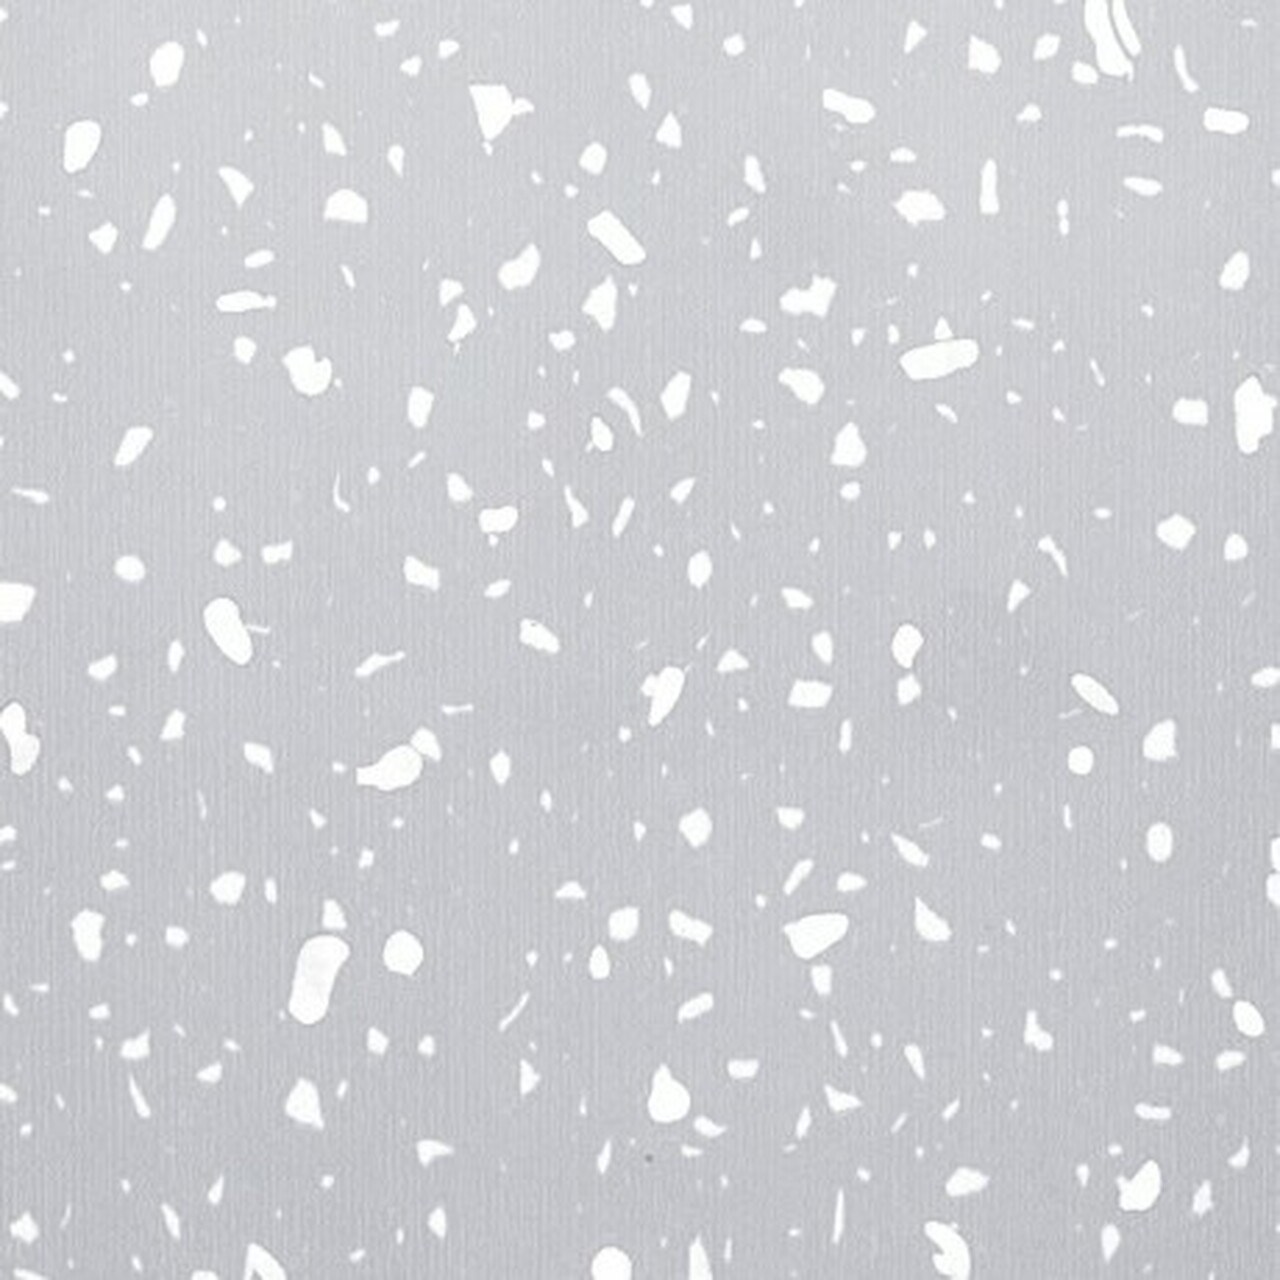 2.4m x 1m Wall Panel 10mm (Grey Storm Sparkle)